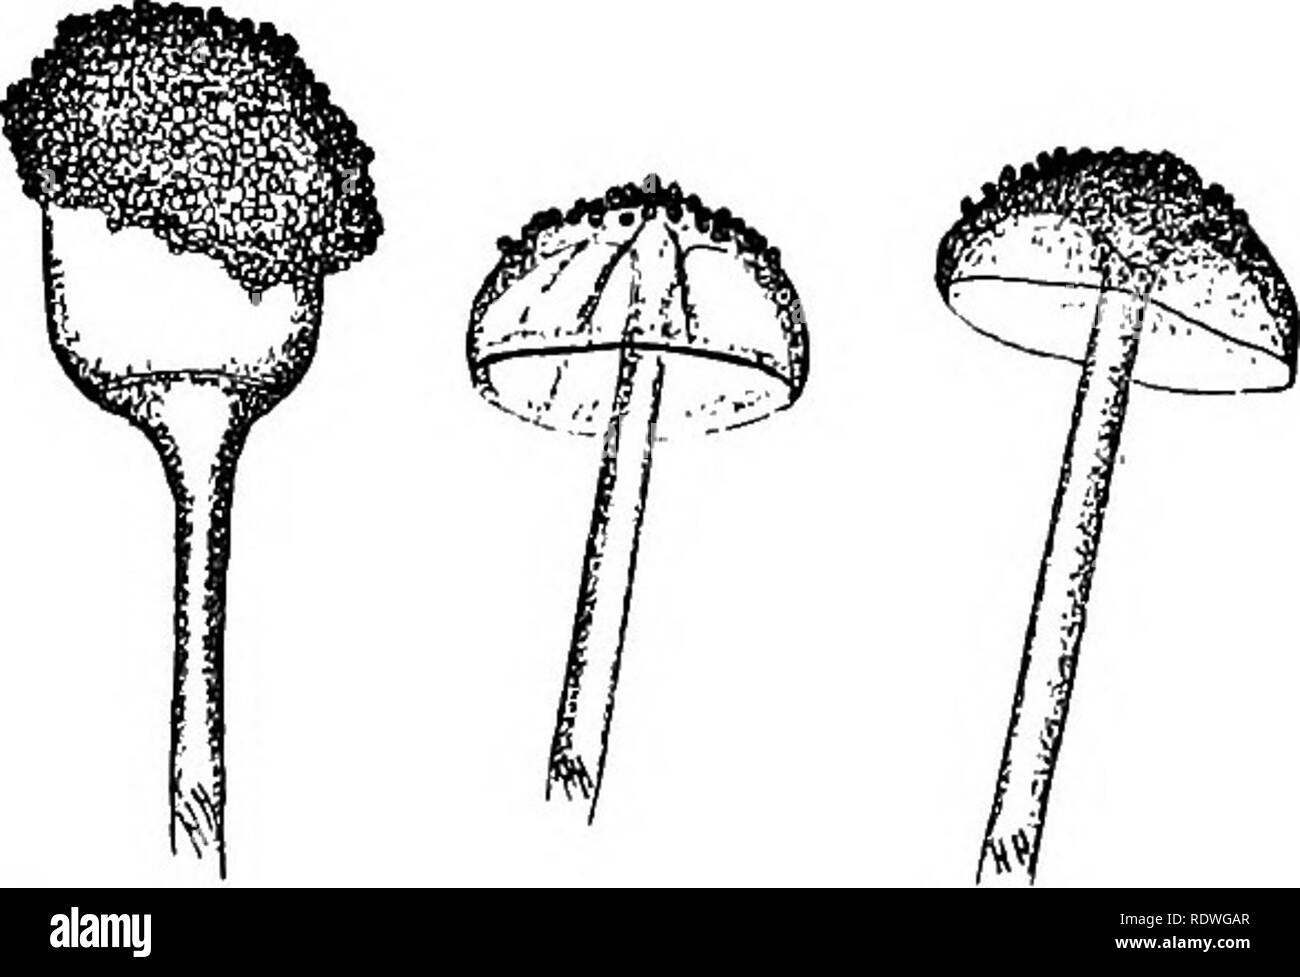 . Elementary botany. Botany. Fig. 133- A mucor (Rhizopus nigricans); at left nearly mature sporangium with columella showing within; in the middle is ruptured sporangium with some of the gonidia clinging to the colu- mella ; at right two ruptured sporangia with everted columella. capable of growing and forming the mycelium again. They are sometimes called chlamydospores. Water Moulds (Saprolegnia). 279. The water moulds are very interesting plants to study because they are so easy to obtain, and it is so easy to observe a type of gonidium here to which we have referred in our studies of the al Stock Photo